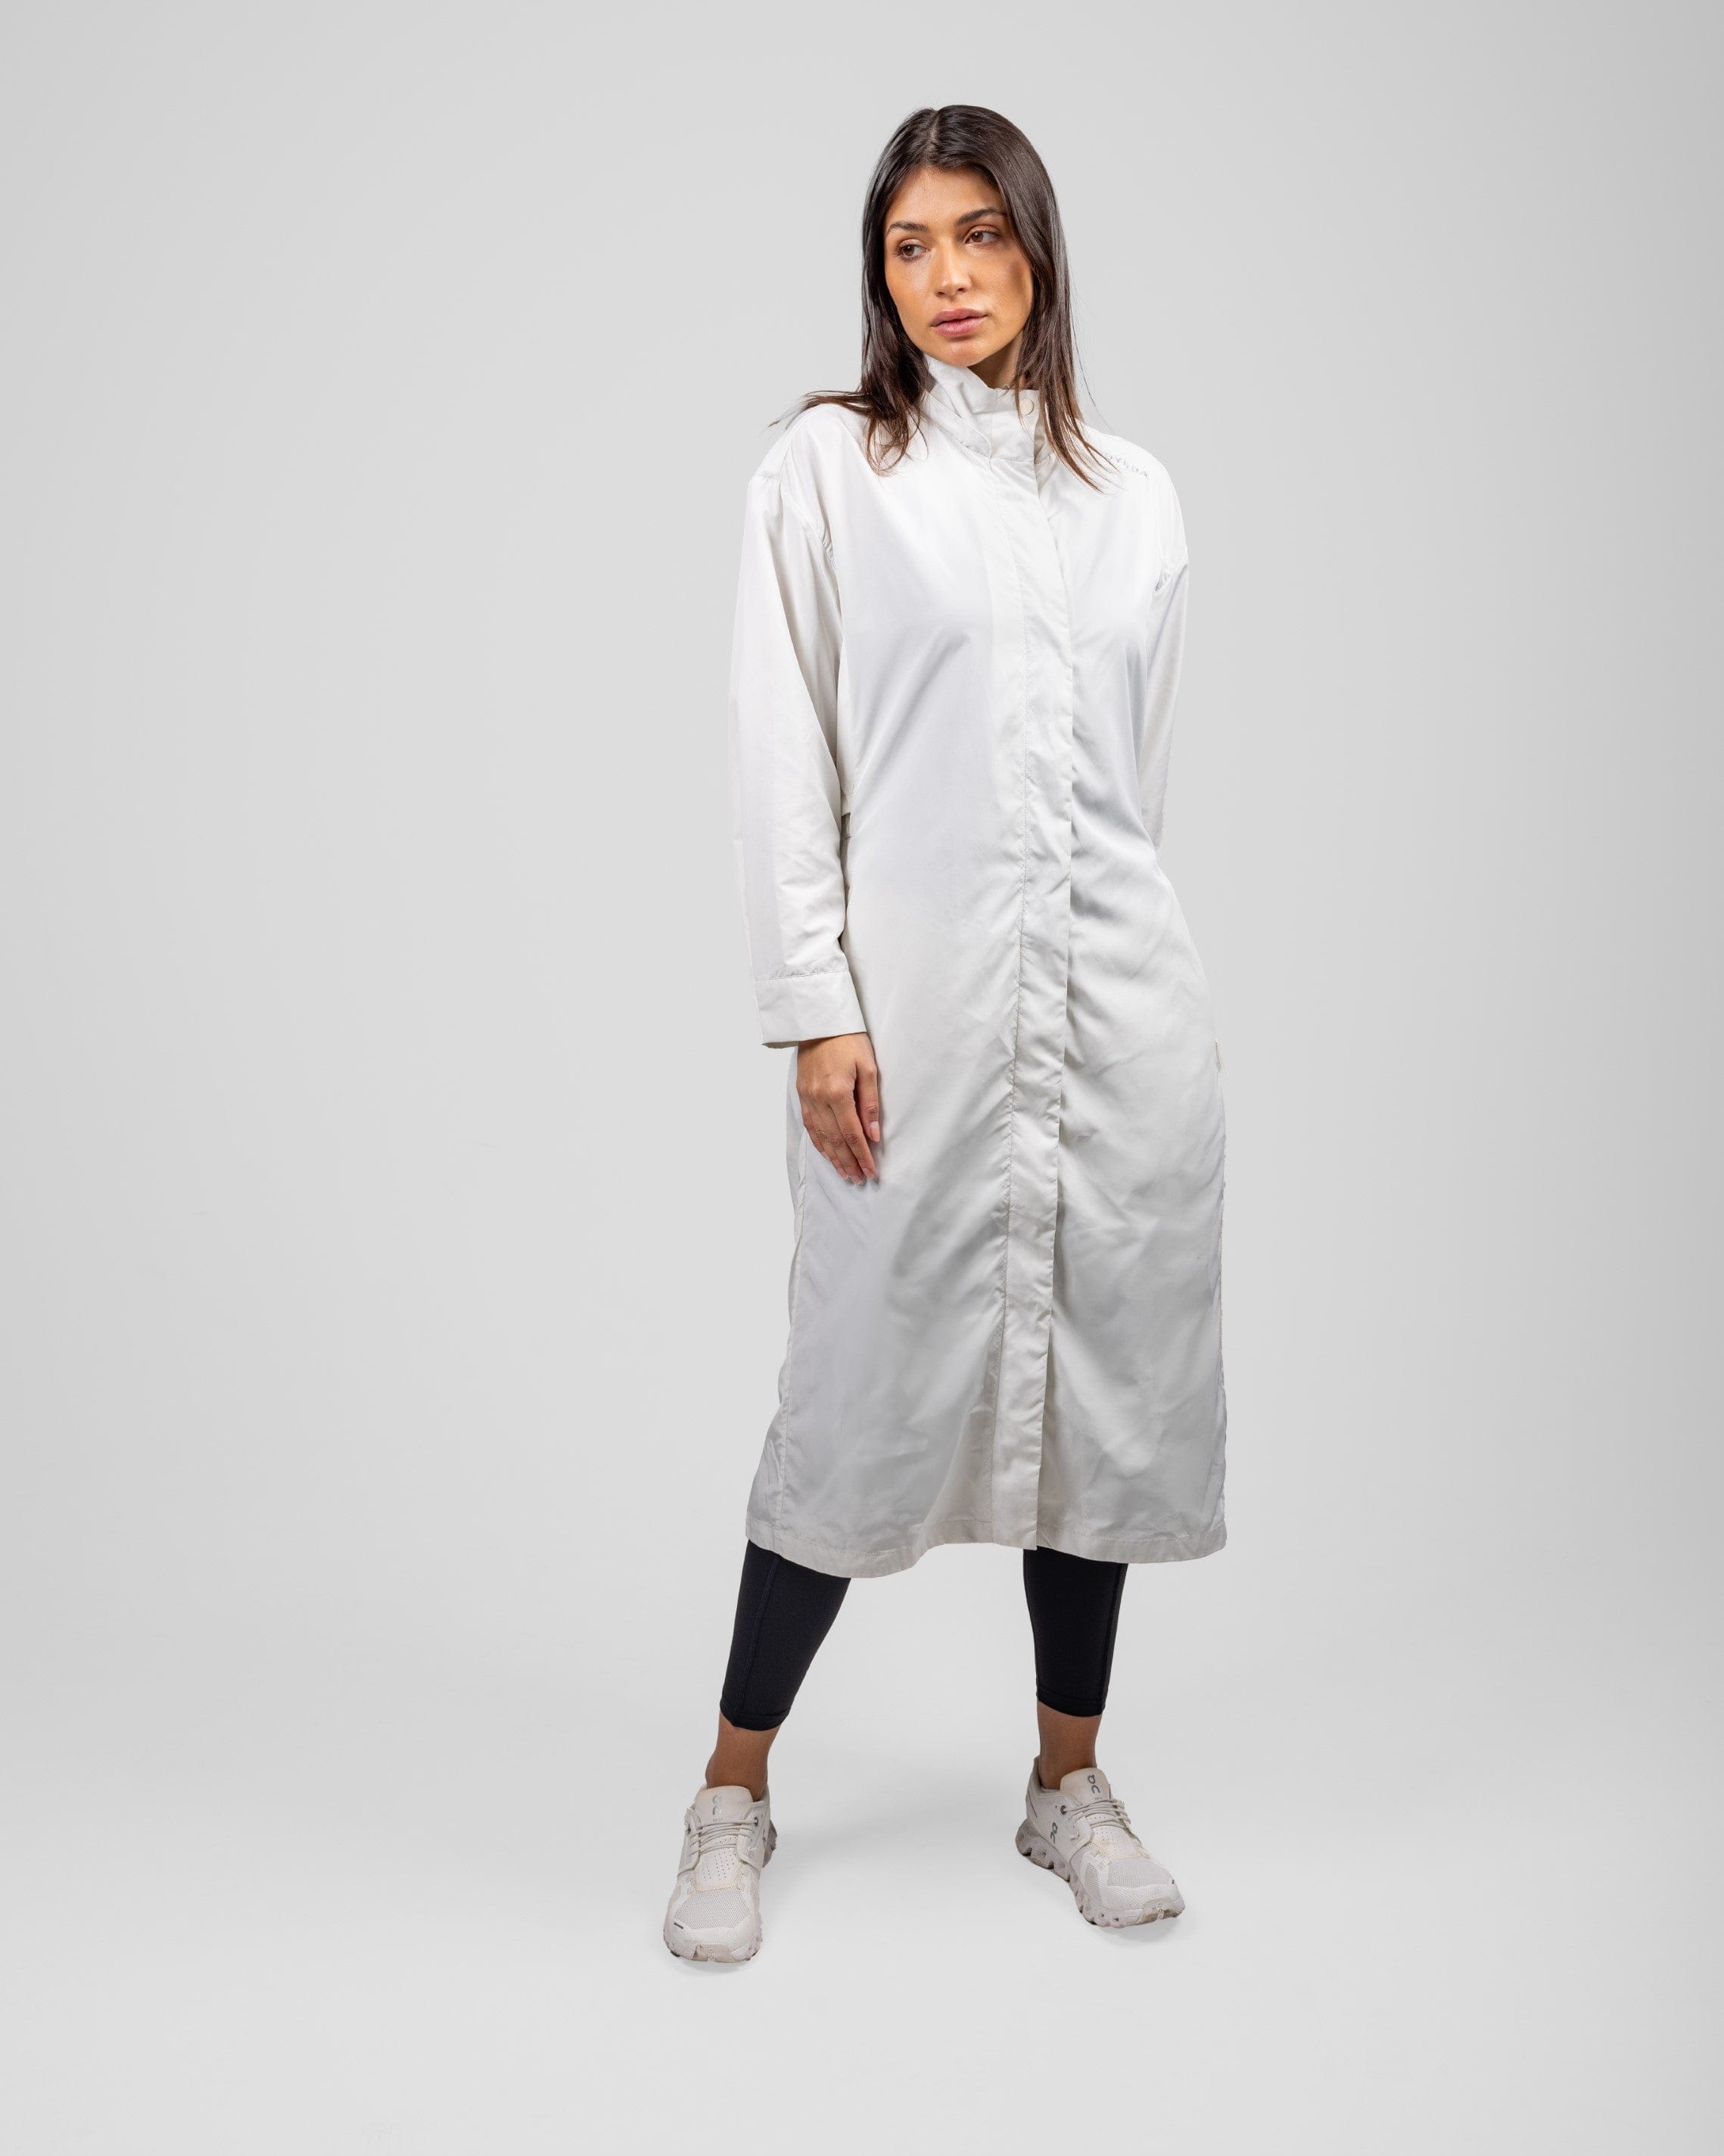 A model in a modest Off White MAK LIGHT PARKA by Qynda made of lightweight fabric and leggings, posing, standing against a light gray background.